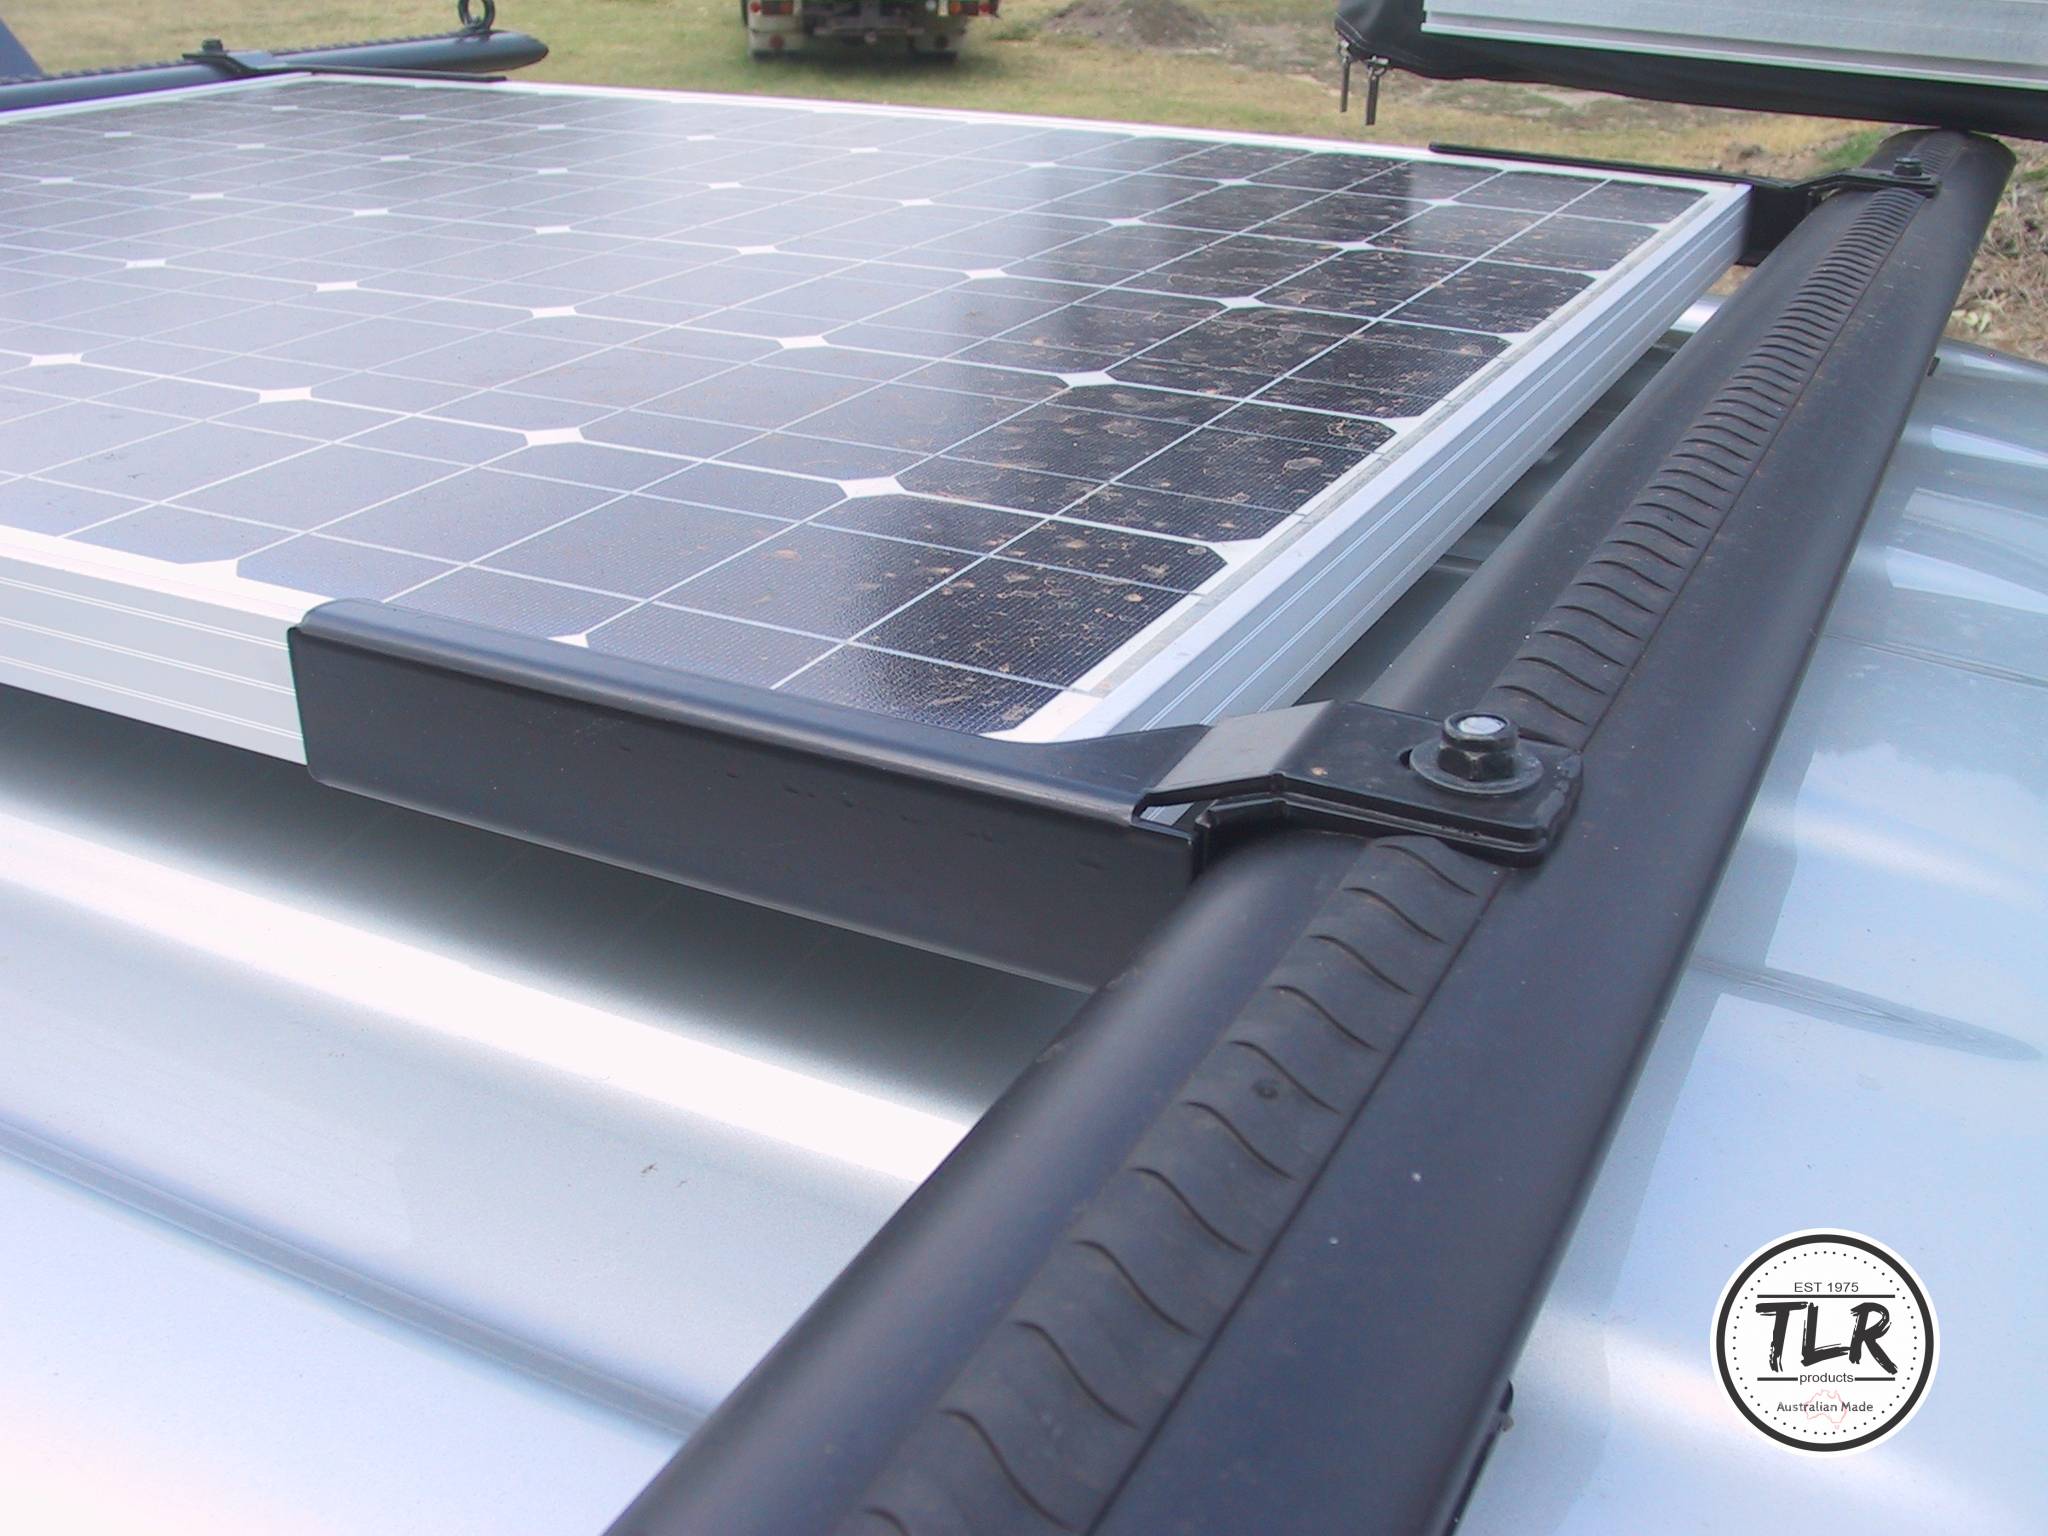 mounting-rails-for-solar-panels-in-perth-solar-panels-perth